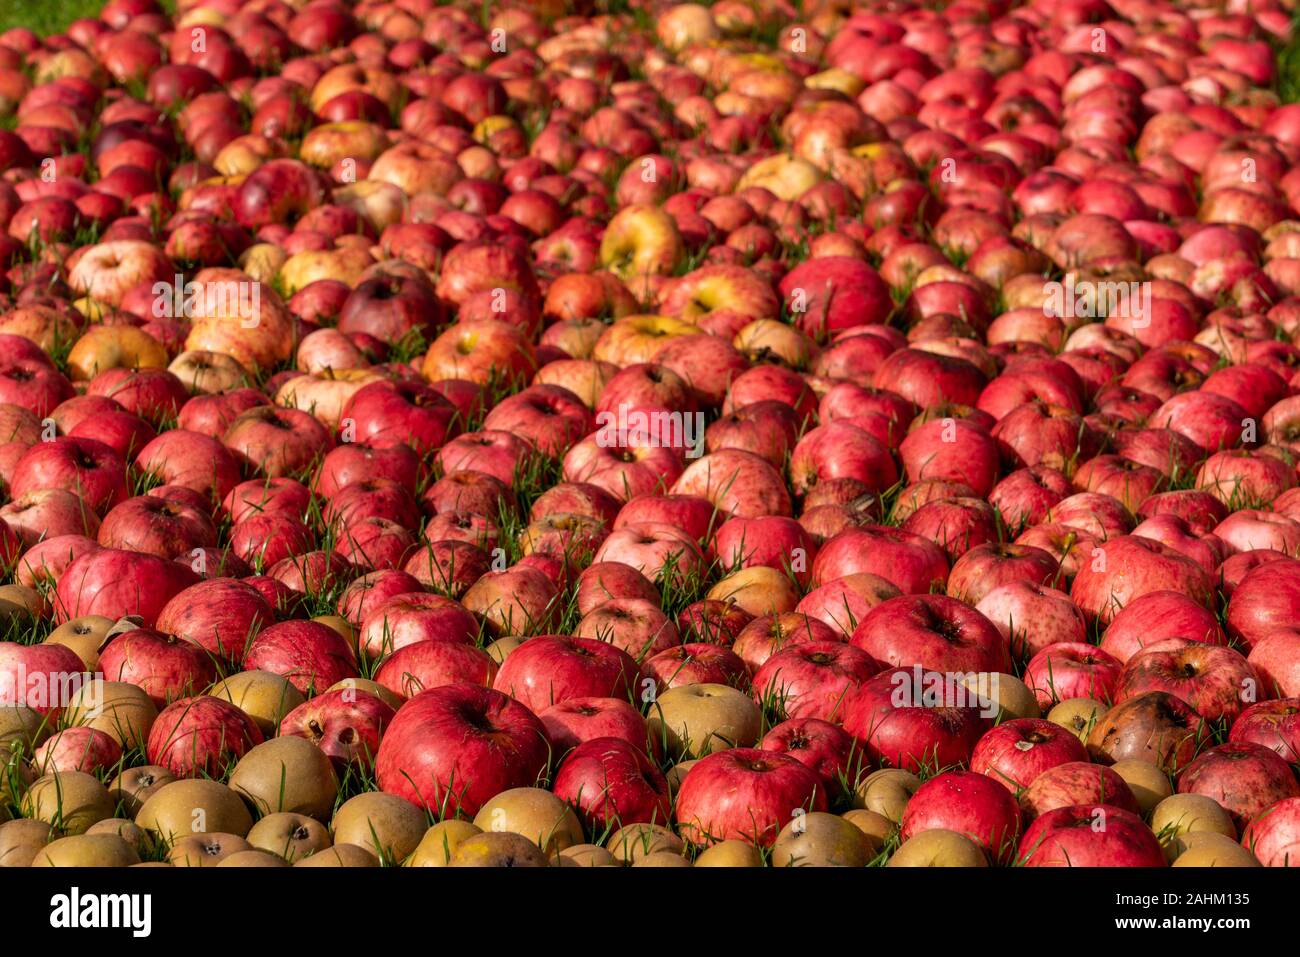 Hundreds of apples and pears laying on the ground after a bumper harvest Stock Photo